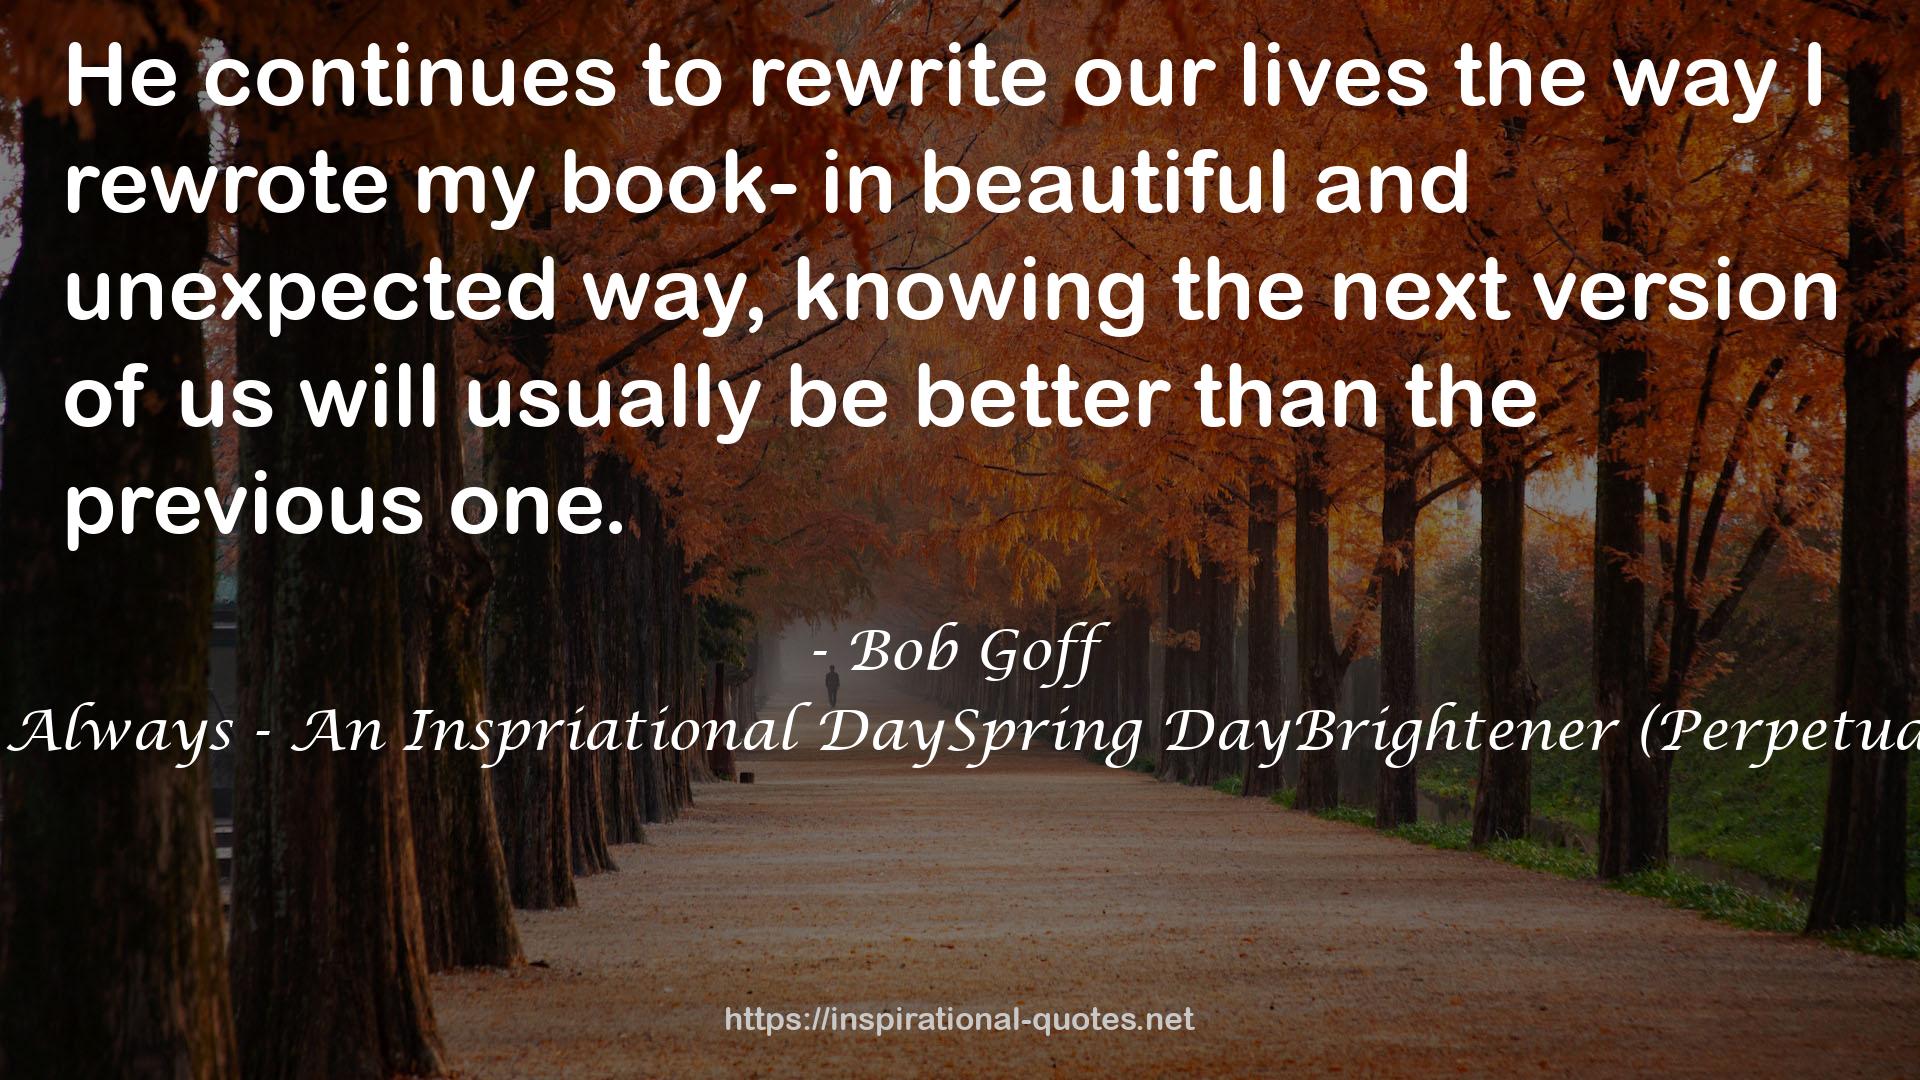 Everybody Always - An Inspriational DaySpring DayBrightener (Perpetual Calendar) QUOTES